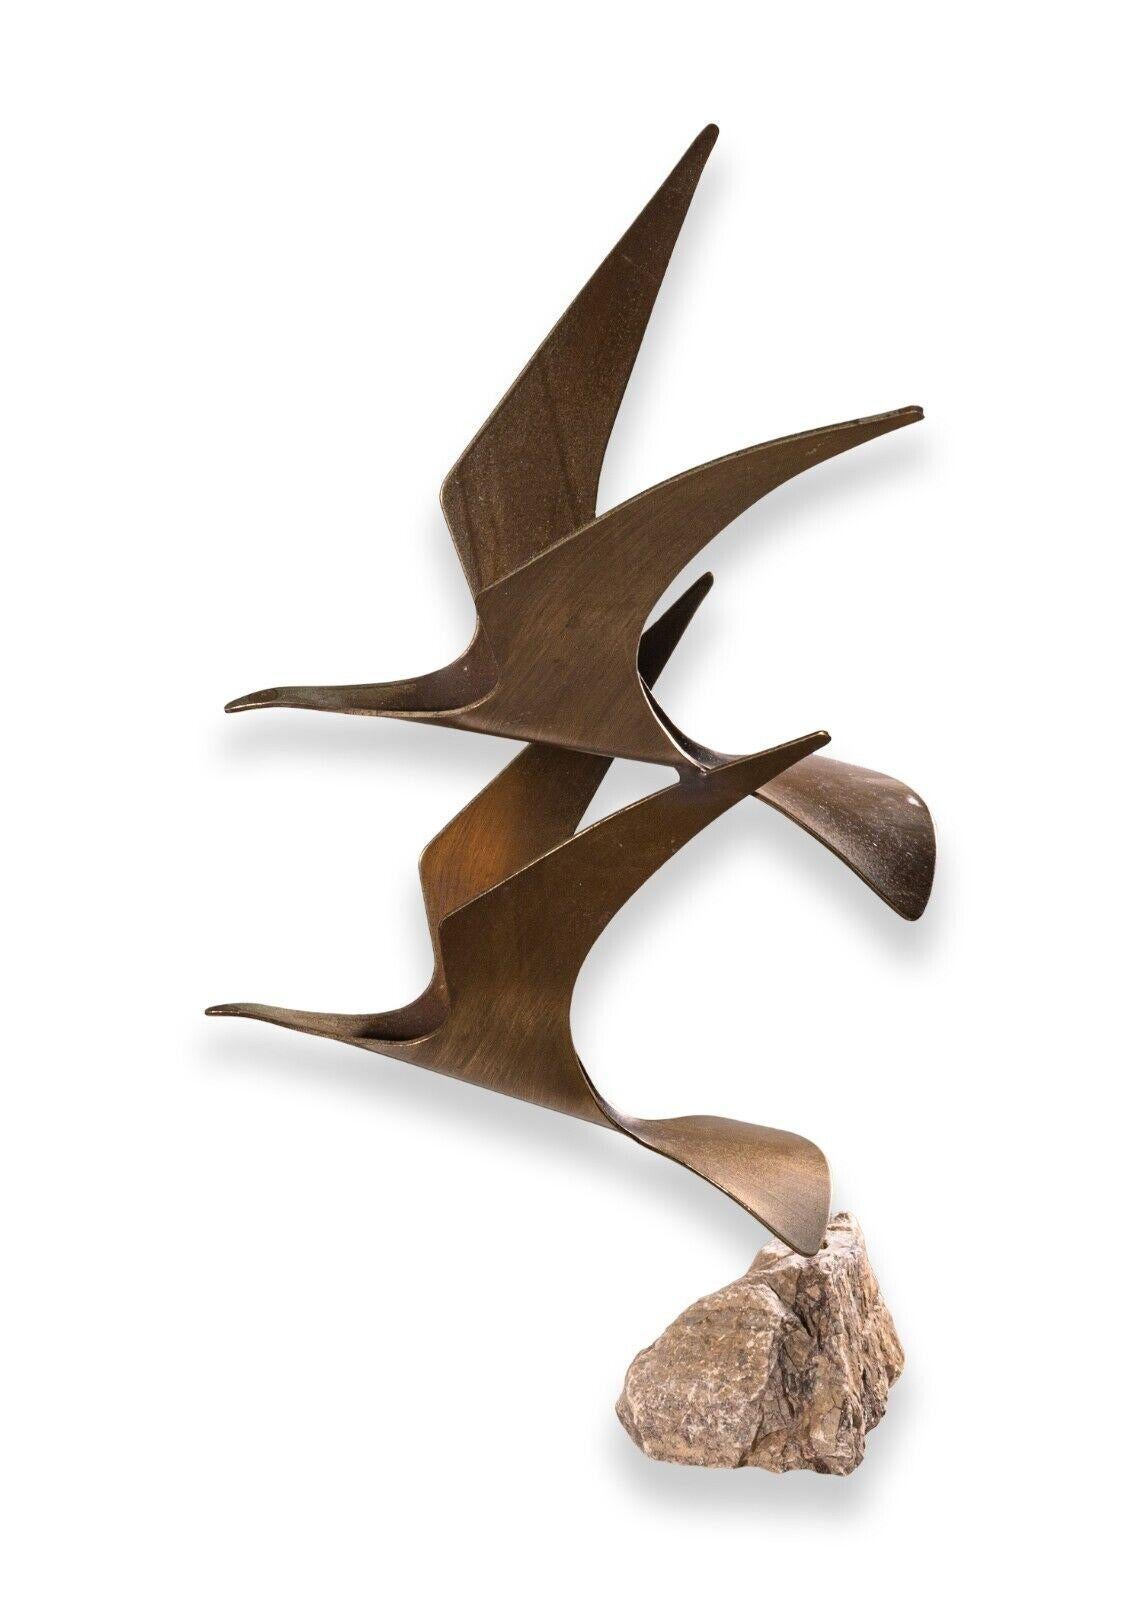 A Curtis Jere pair of doves bronze sculpture on quartz stone base. This is a stunning piece from the studio of Curtis Jere, signed and dated 1980 as pictured above. This piece features a pair of beautifully crafted bronze doves in flight, with a